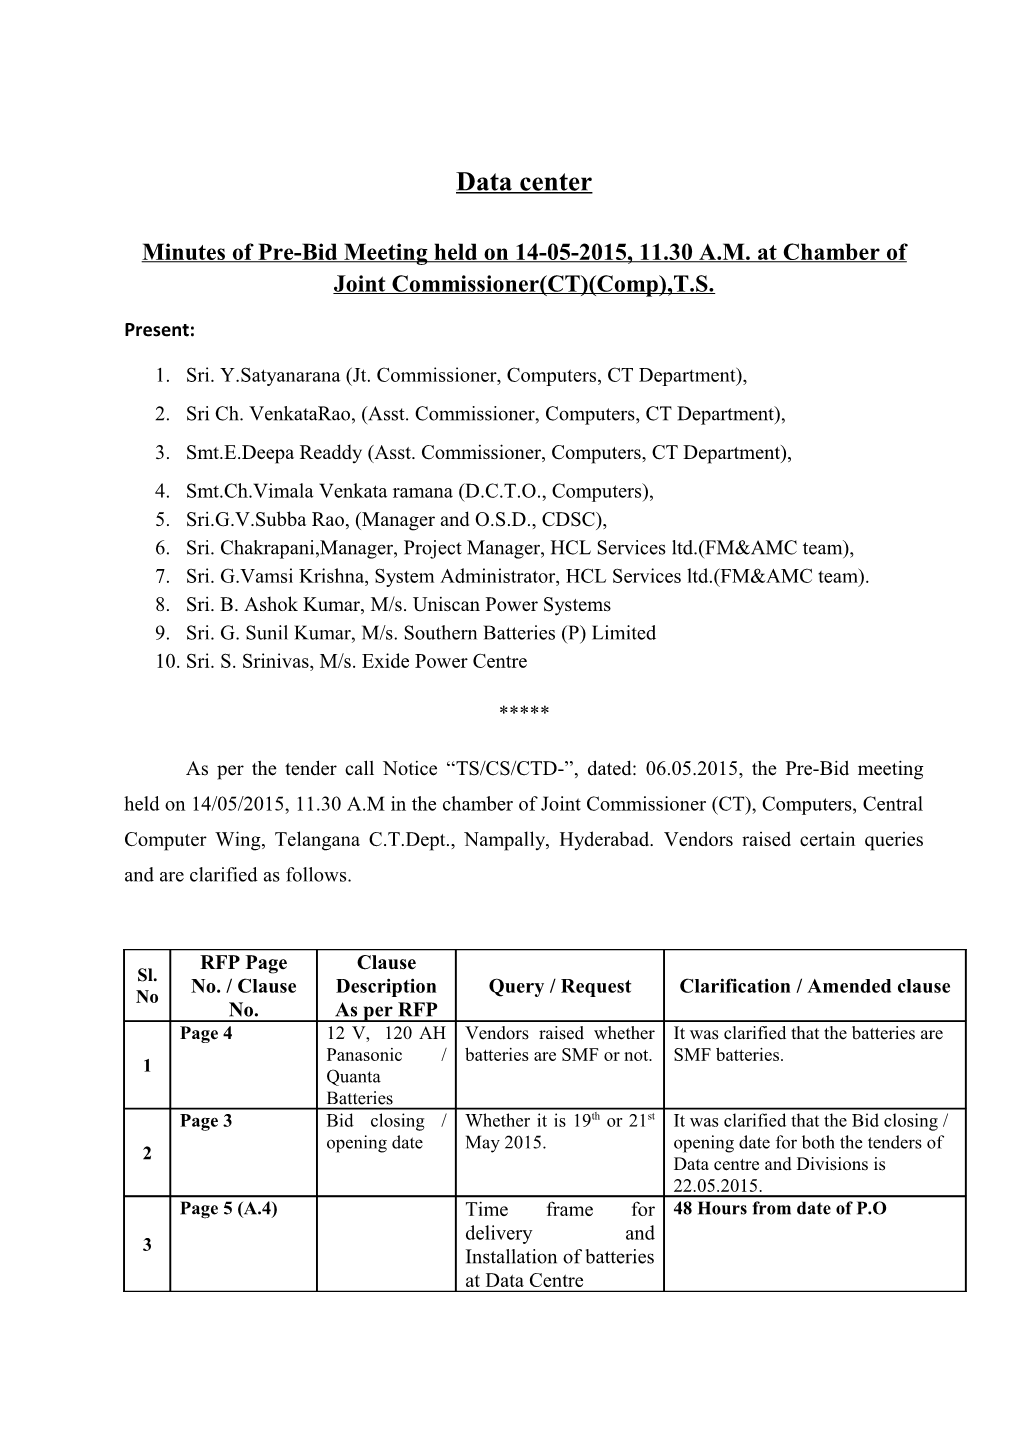 Minutes of Pre-Bid Meeting Held on 14-05-2015, 11.30 A.M. at Chamber of Joint